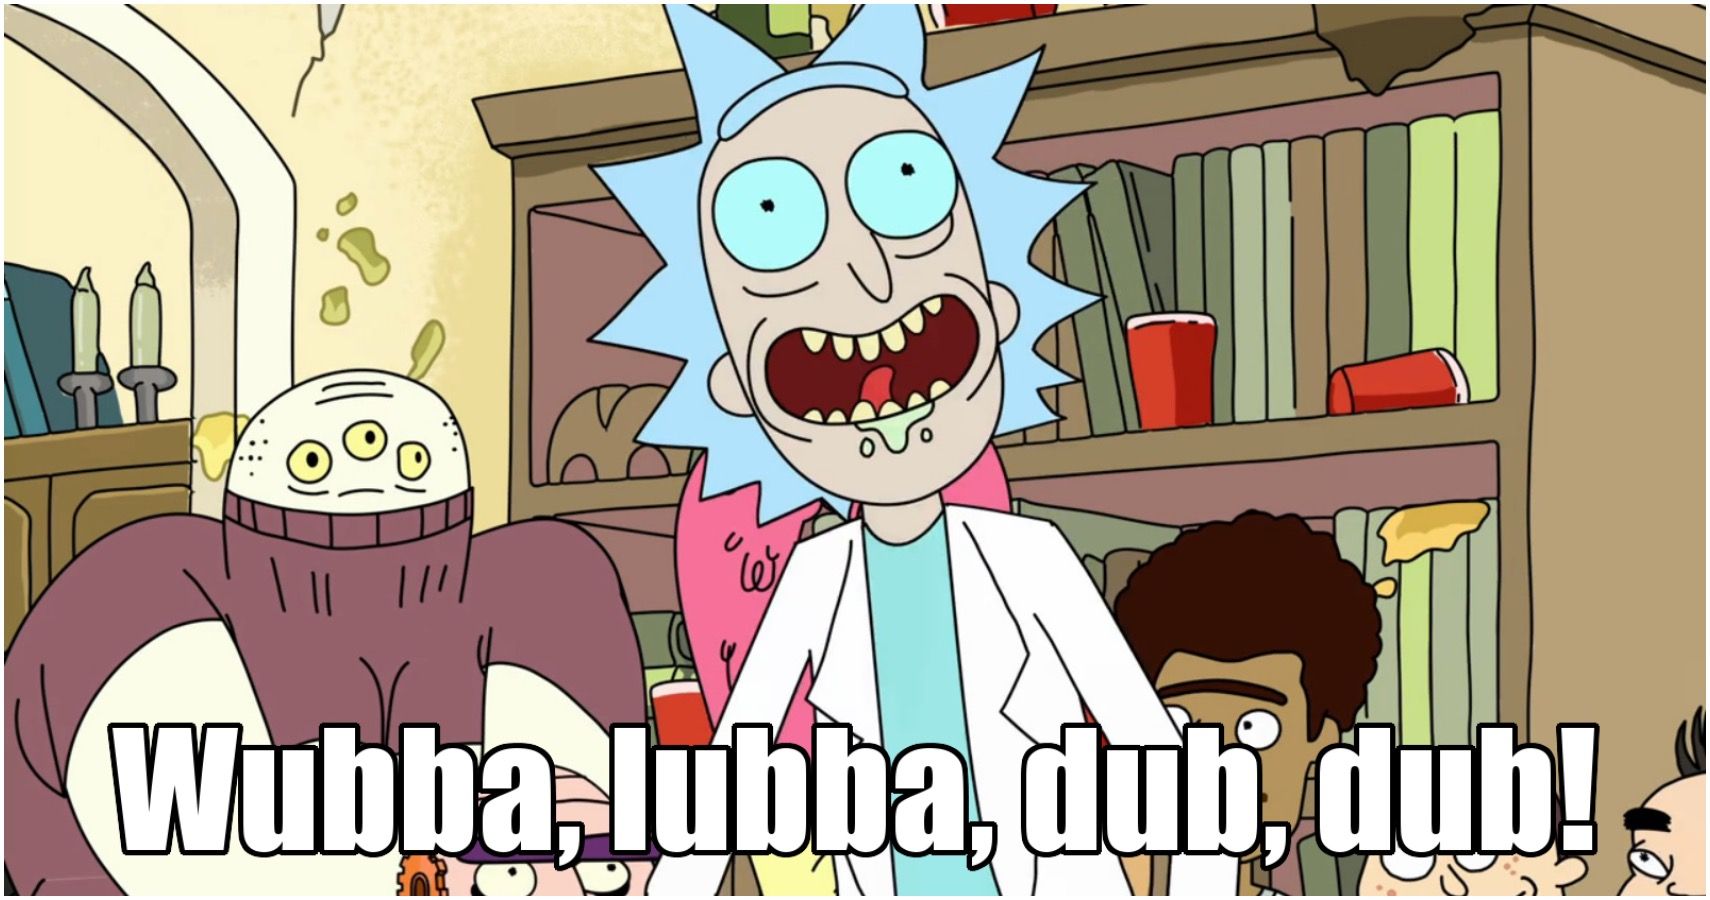 Frank Worthley Arv Kilde Wubba Lubba Dub Dub: 10 Of The Best Rick Quotes From Rick And Morty